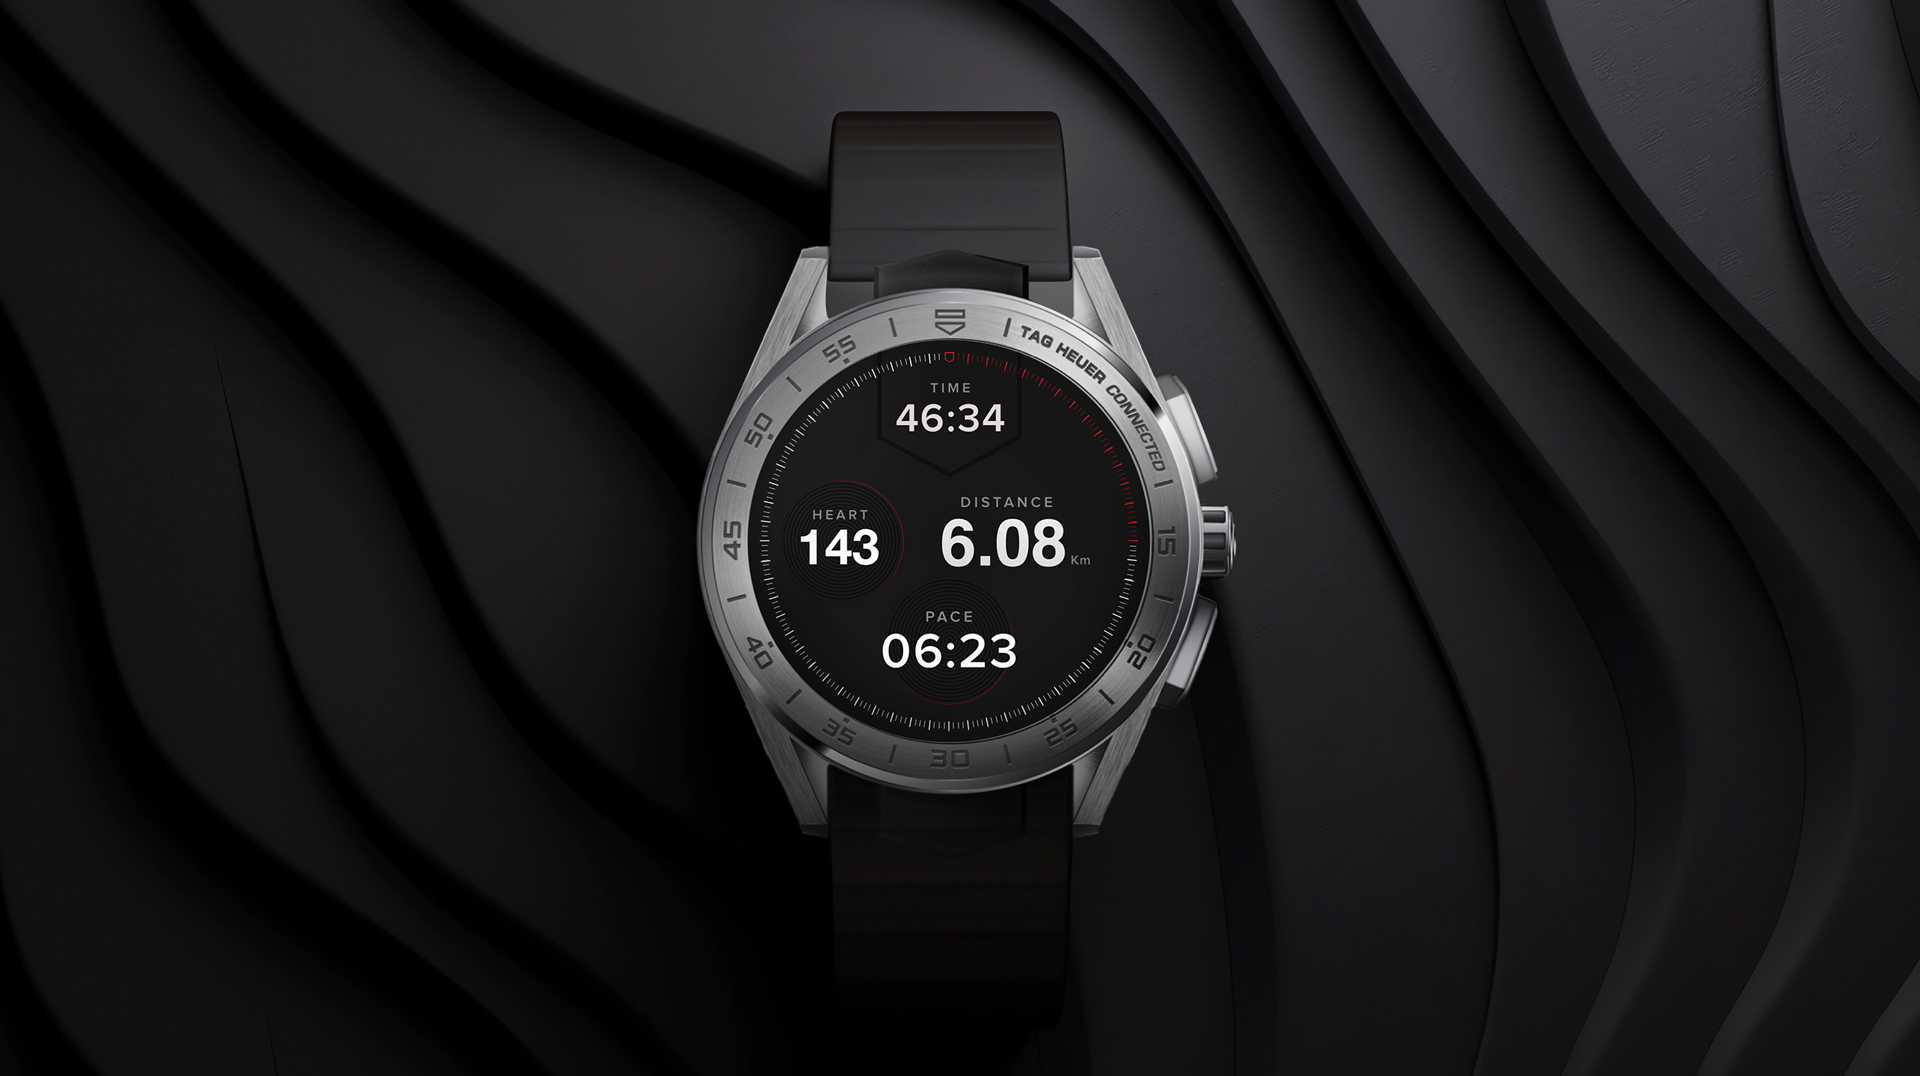 Design of the watch interface